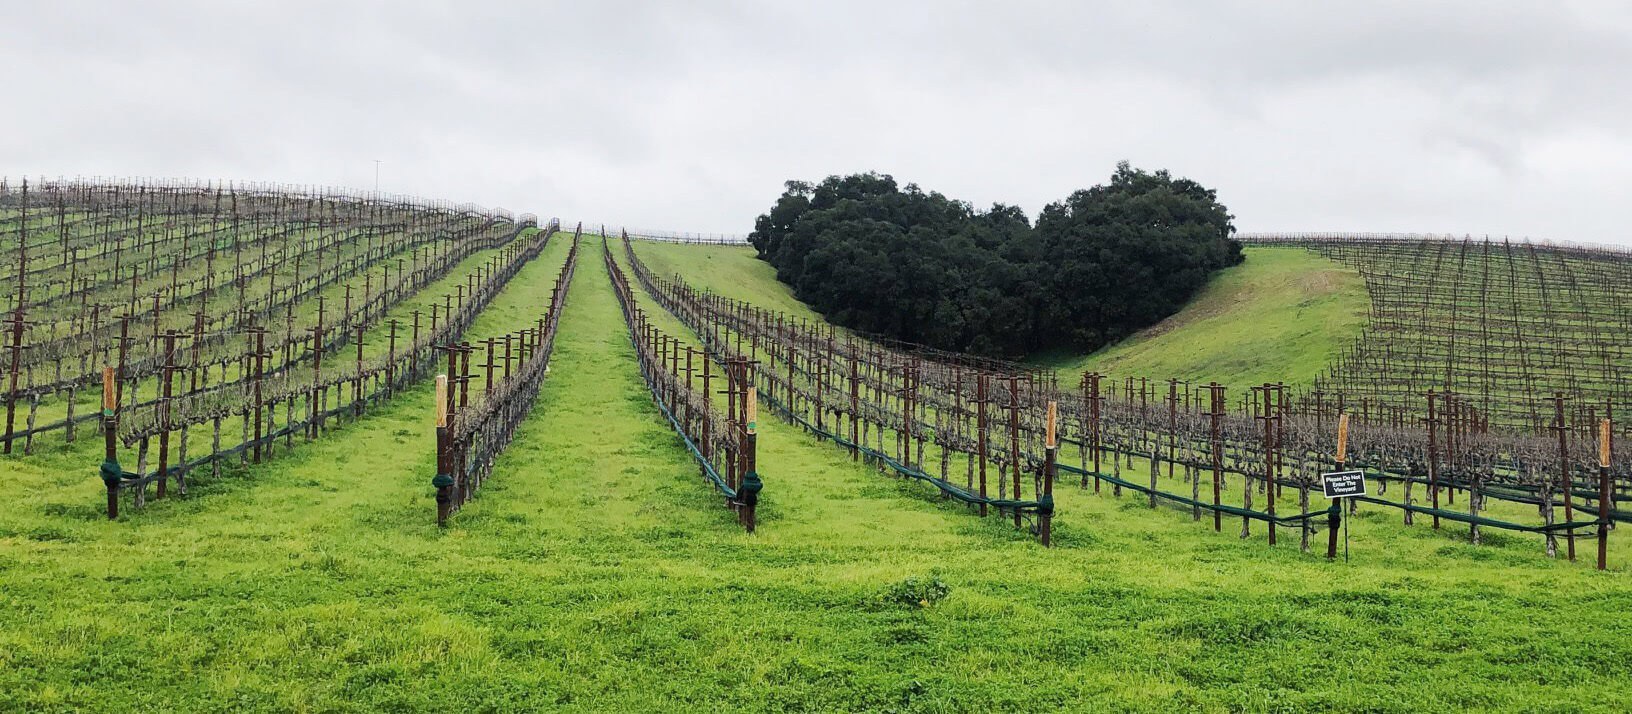 The heart-shaped grove of trees at the center of heart hill vineyard on a cloudy day.